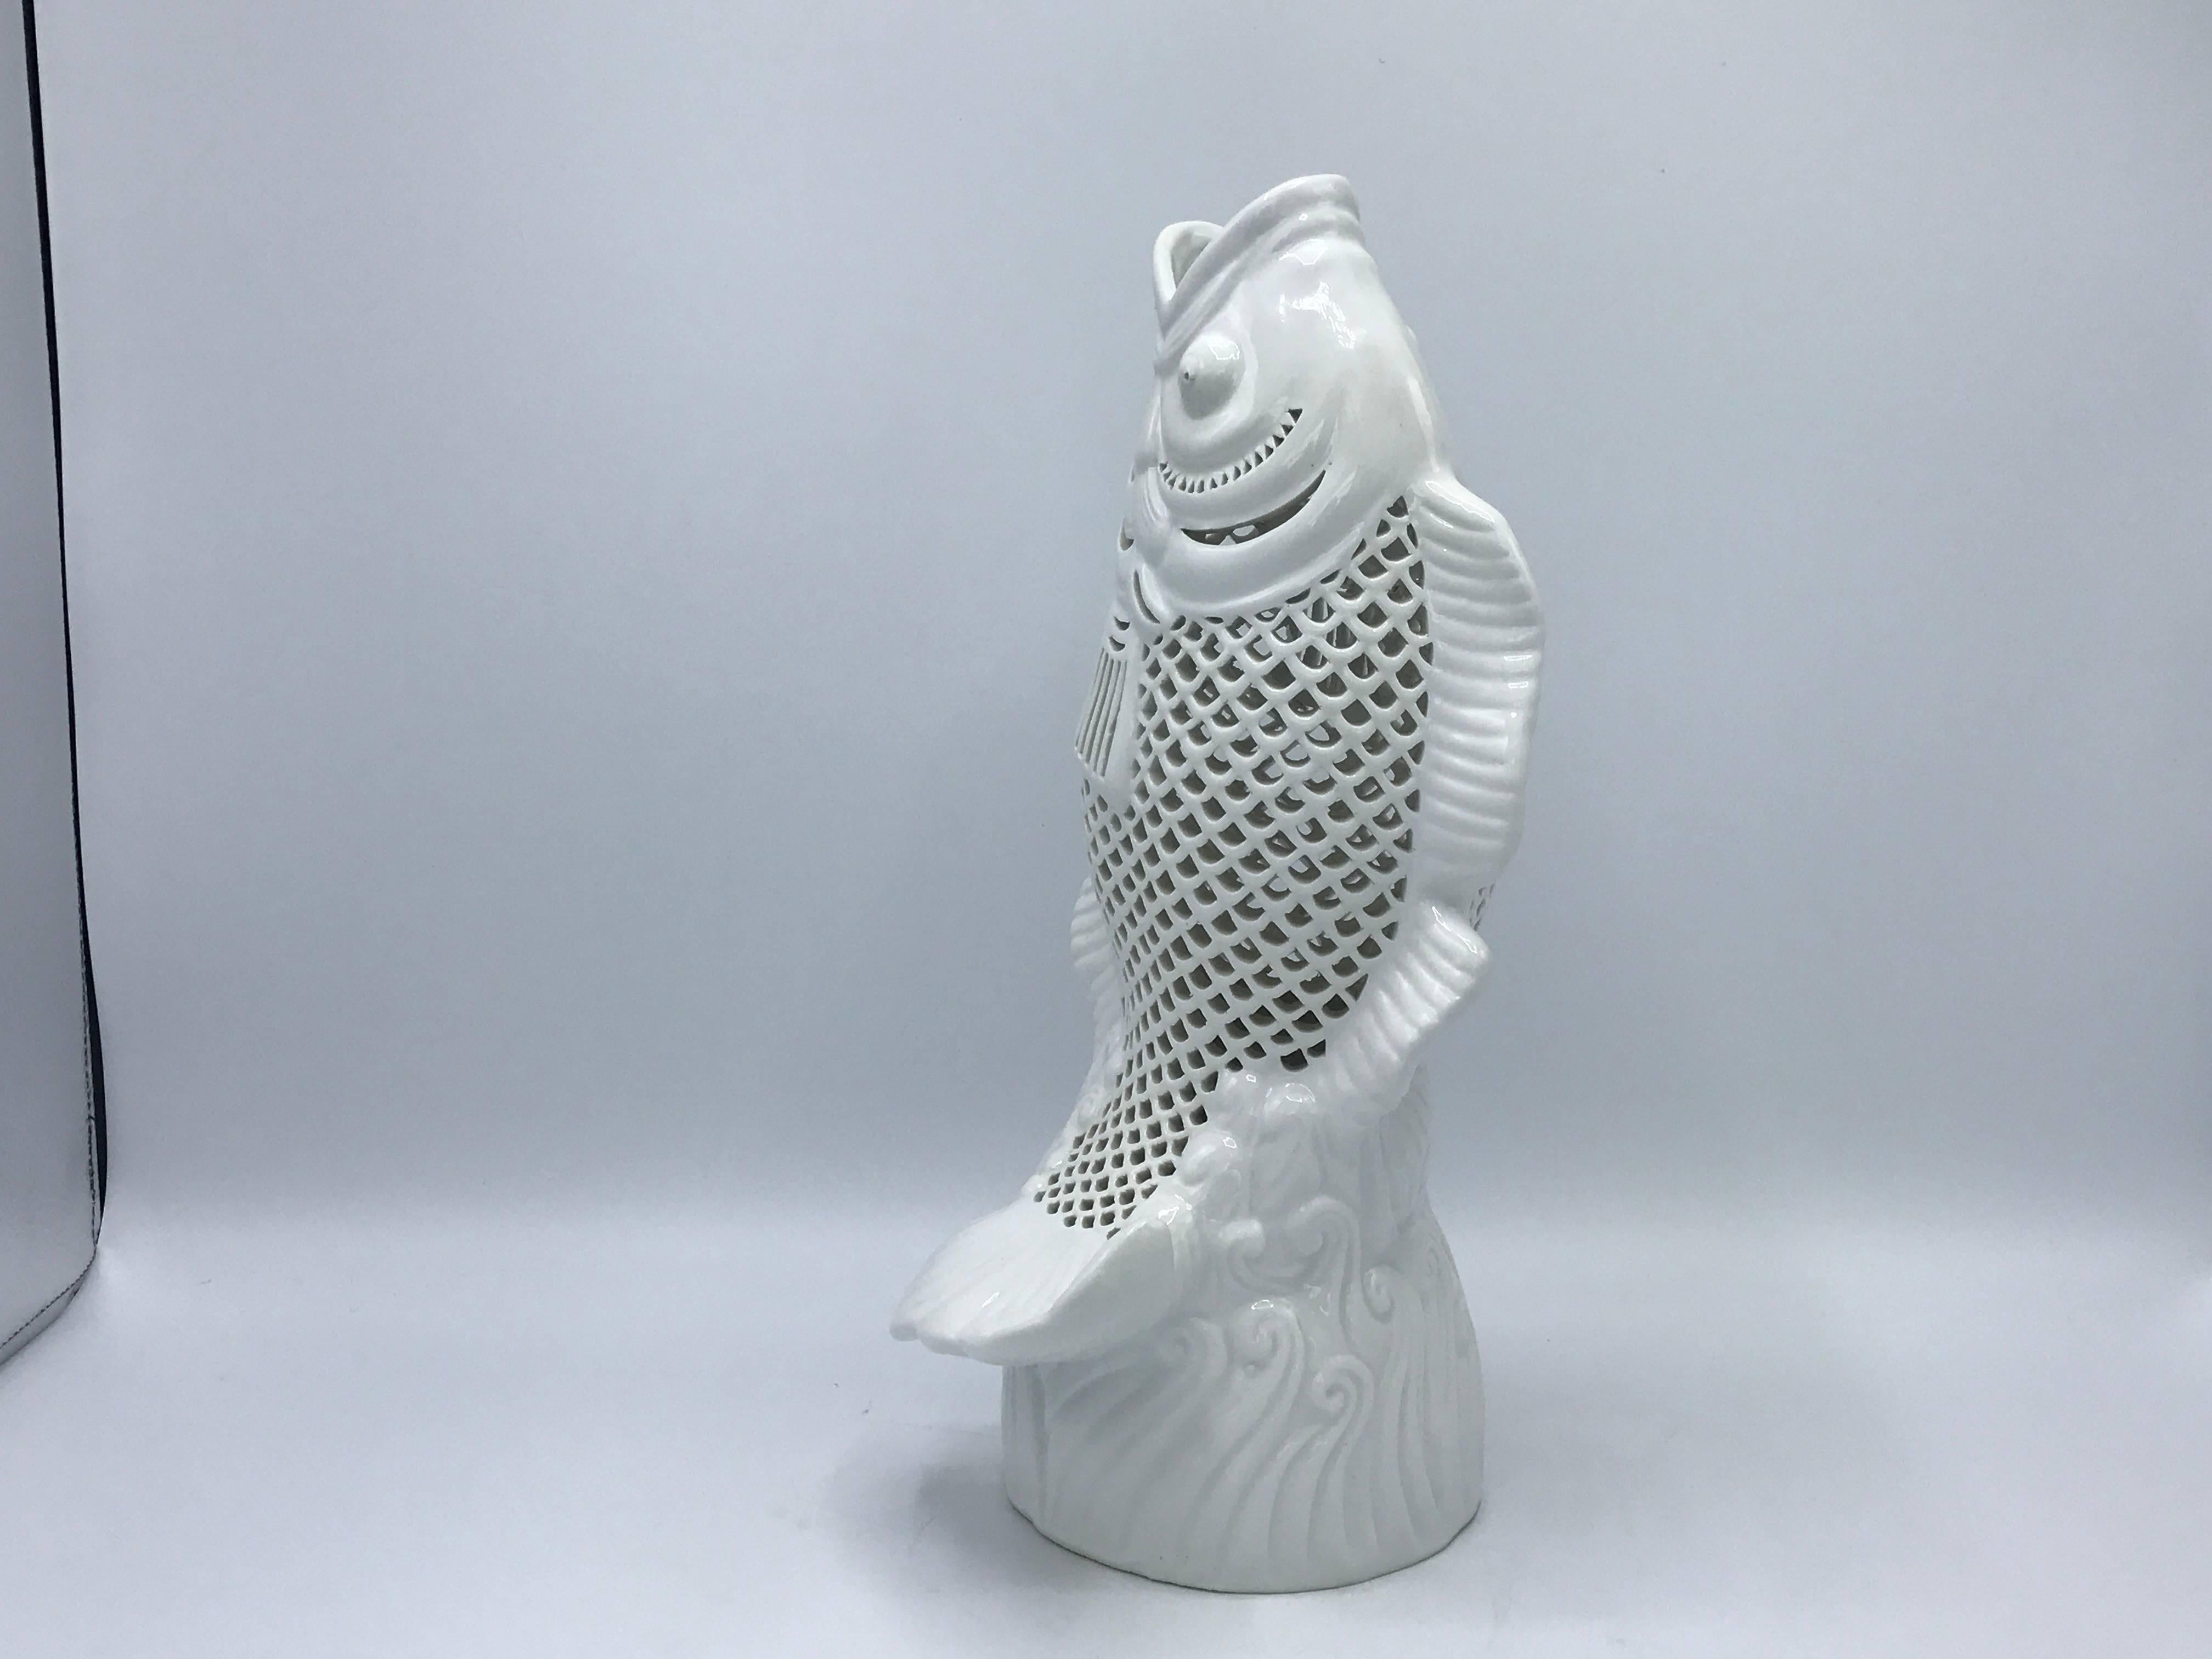 Offered is a fabulous, 1960s Blanc de Chine koi fish sculpture. Pure white porcelain. Pierced along the scales. Small holes underneath, allowing it to easily be converted into a lamp.